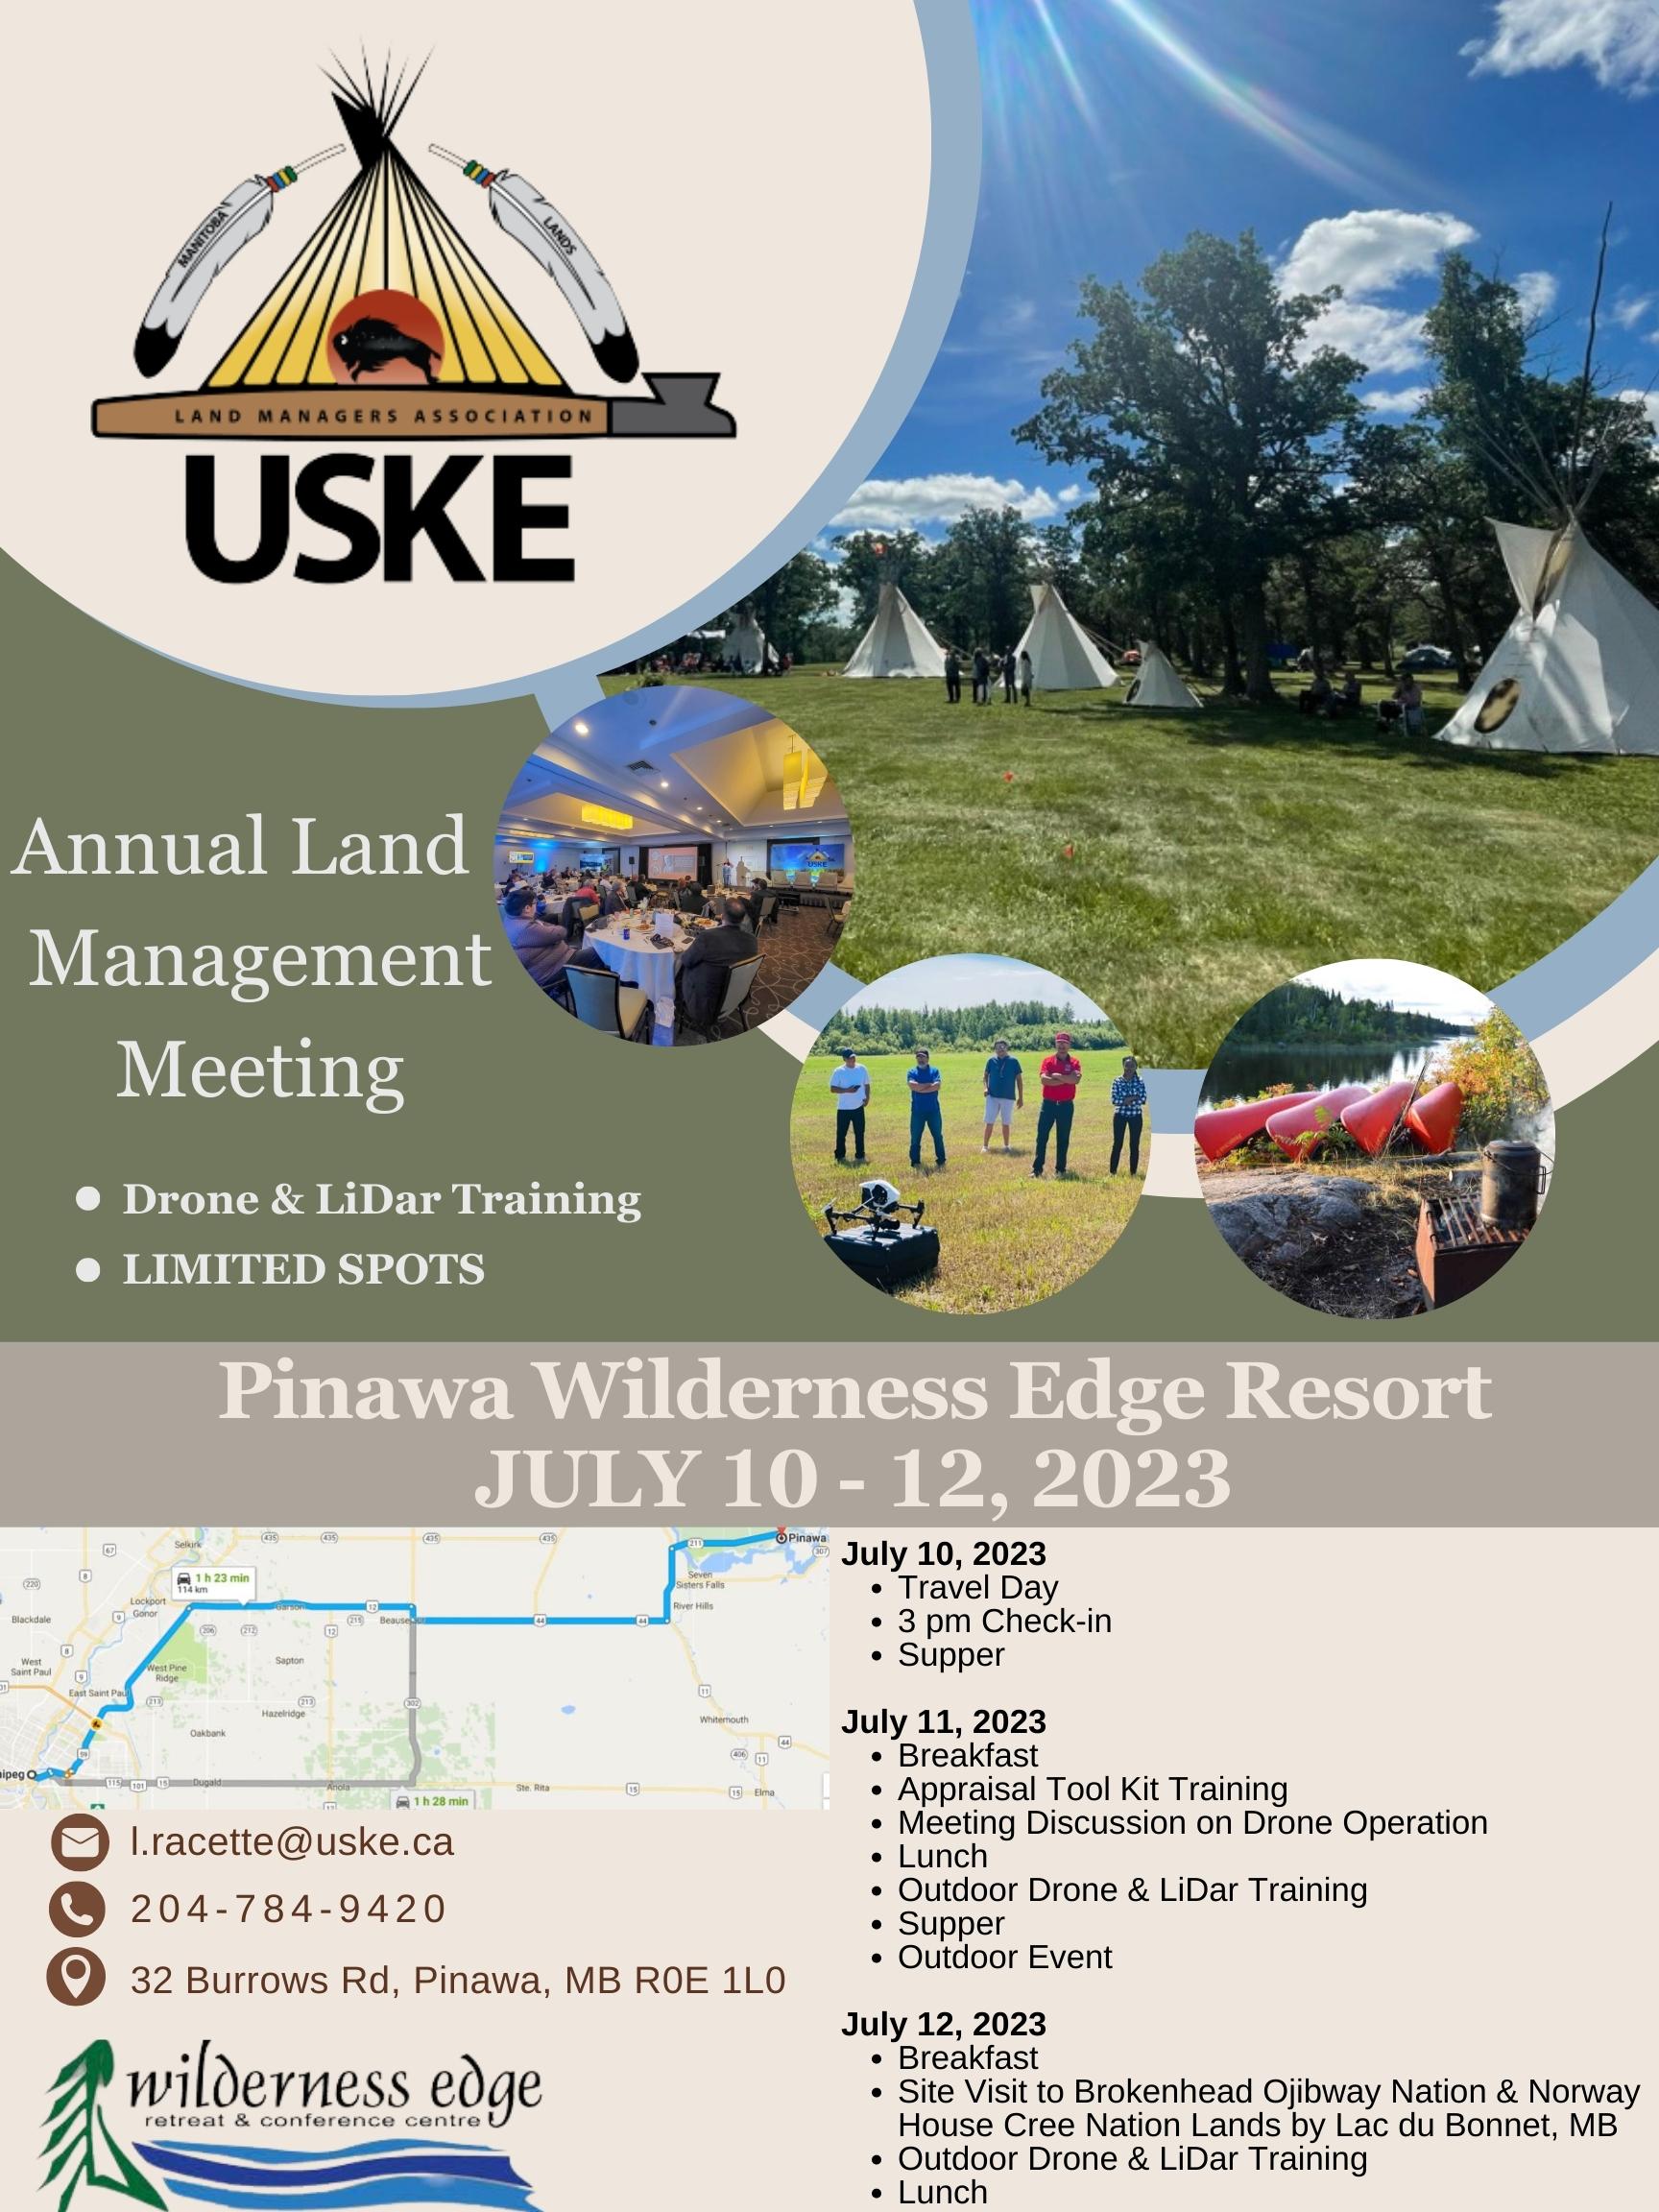 Annual Land Managers Meeting – July 10-12, 2023